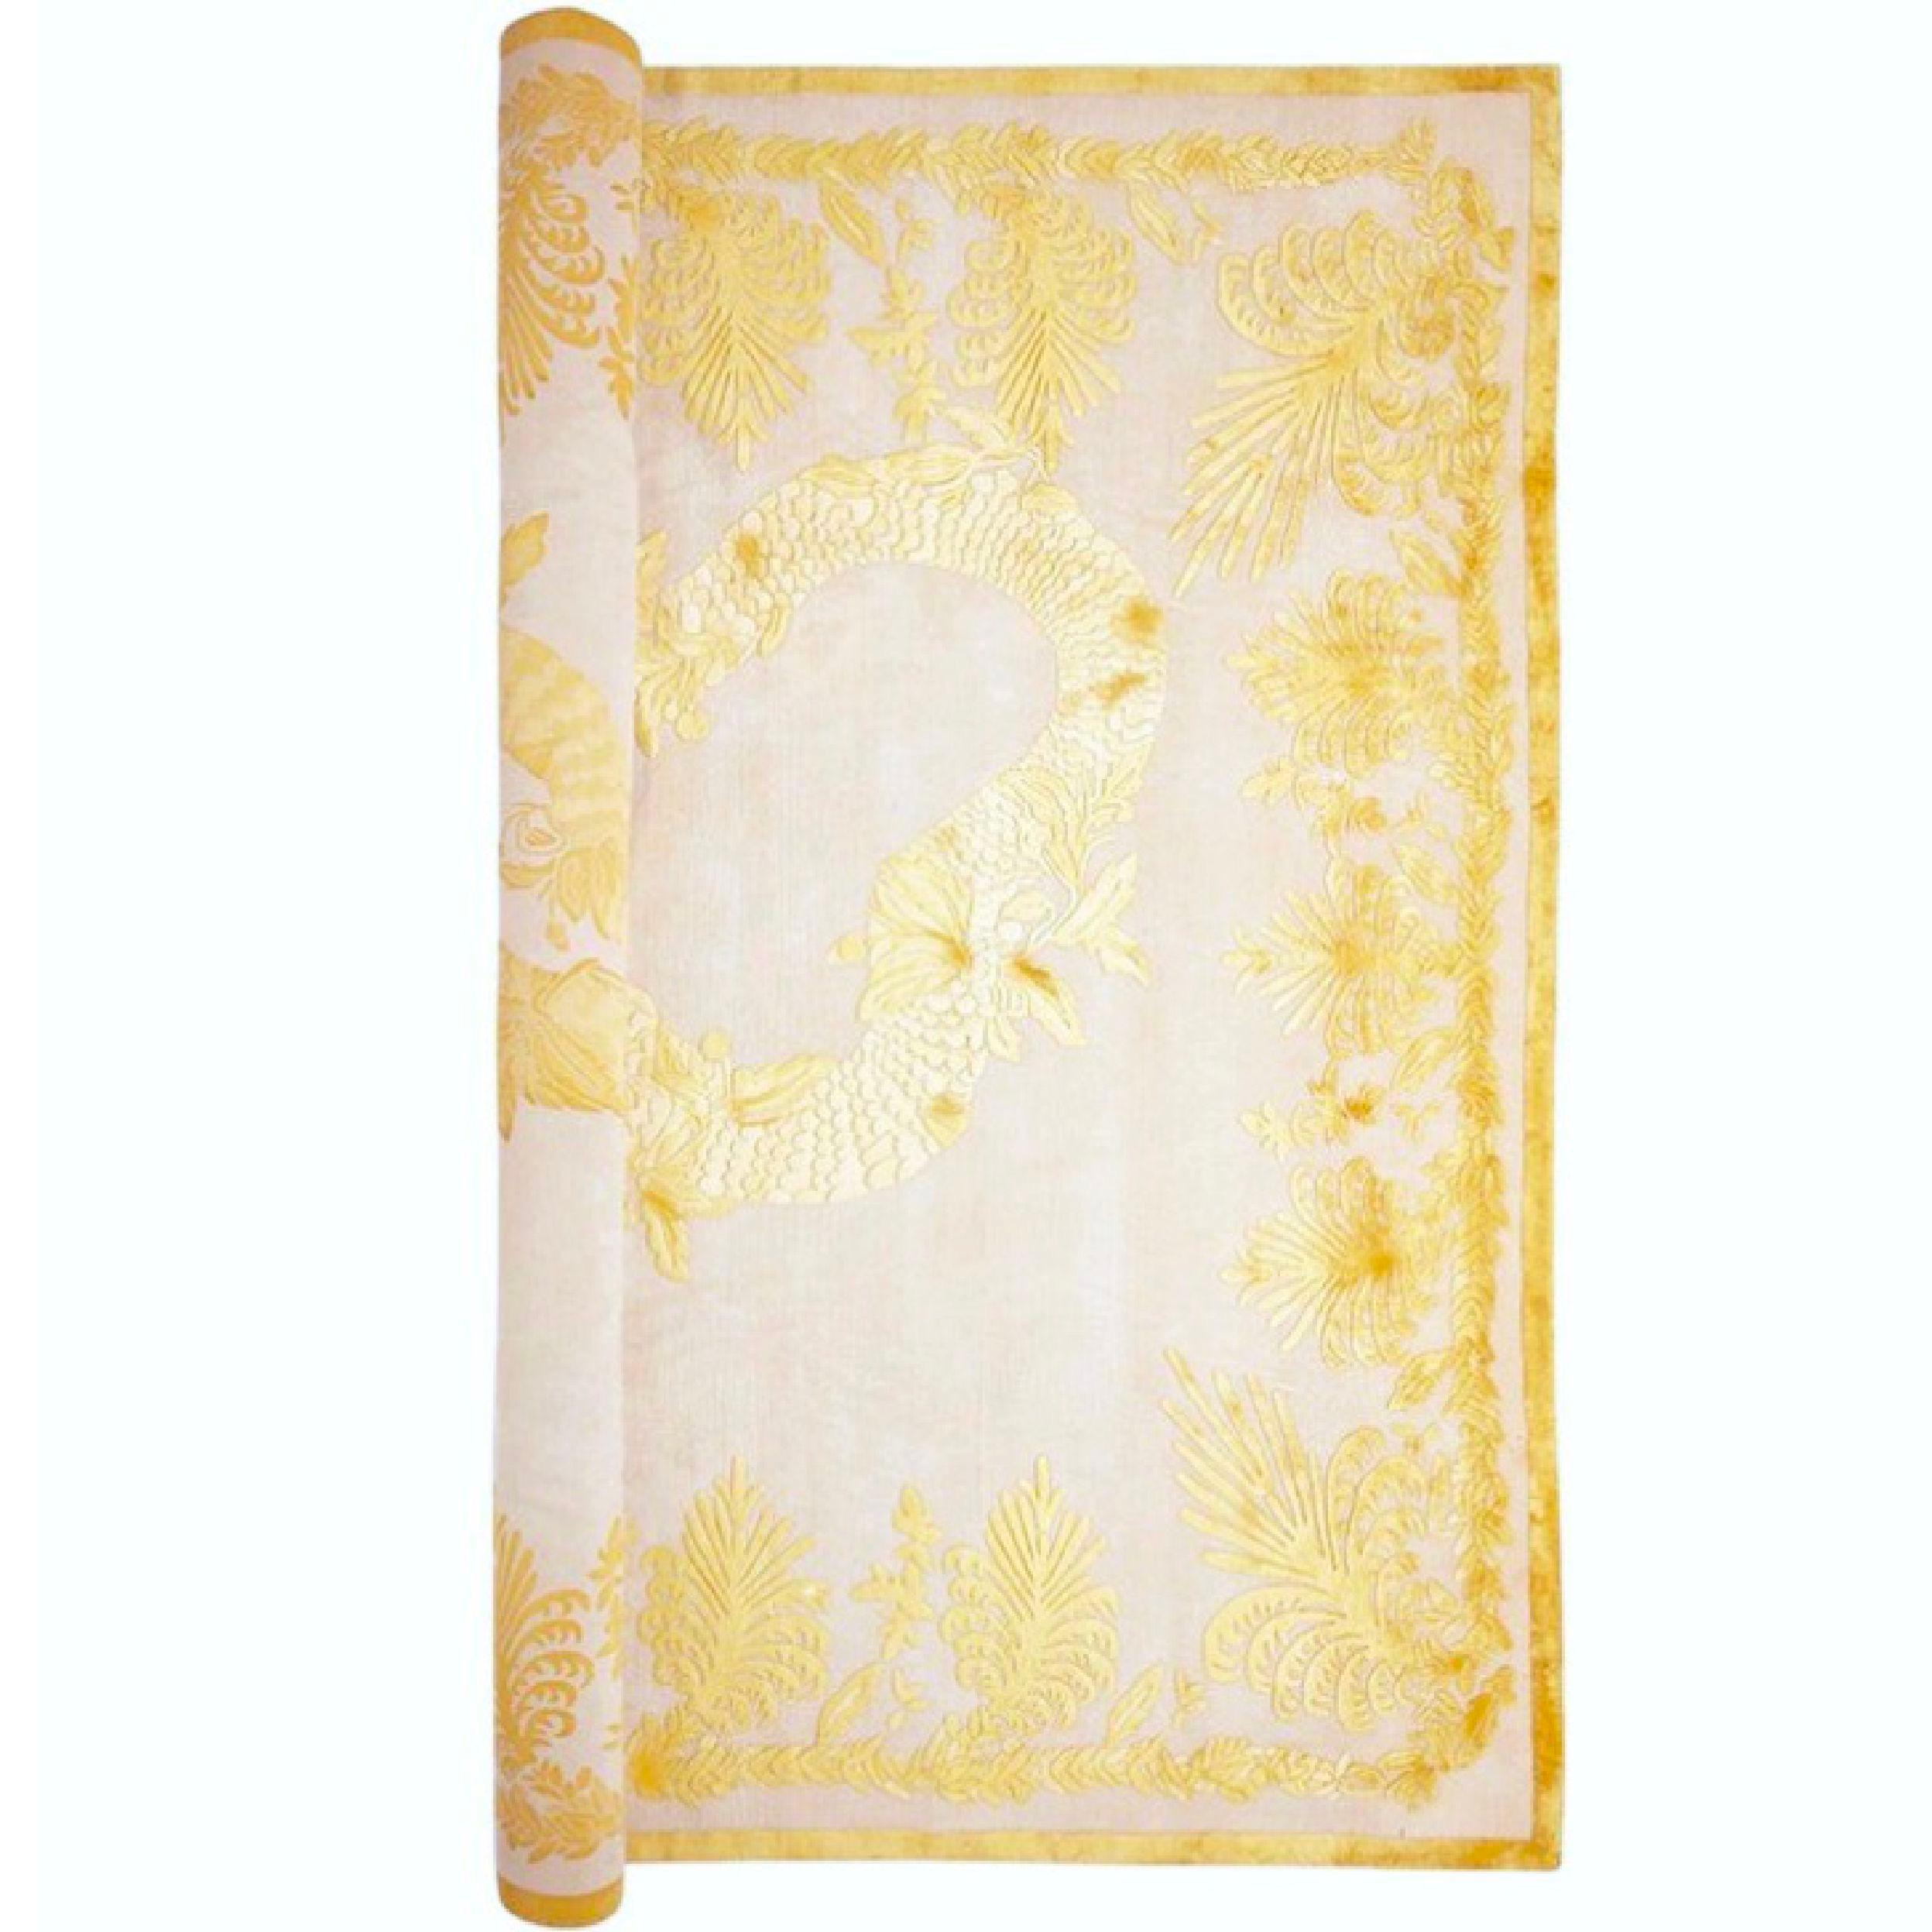 Alexander McQueen Military Brocade Palatial Silk on Wool Hand-Knotted Rug, 2012 In Good Condition For Sale In Brooklyn, NY